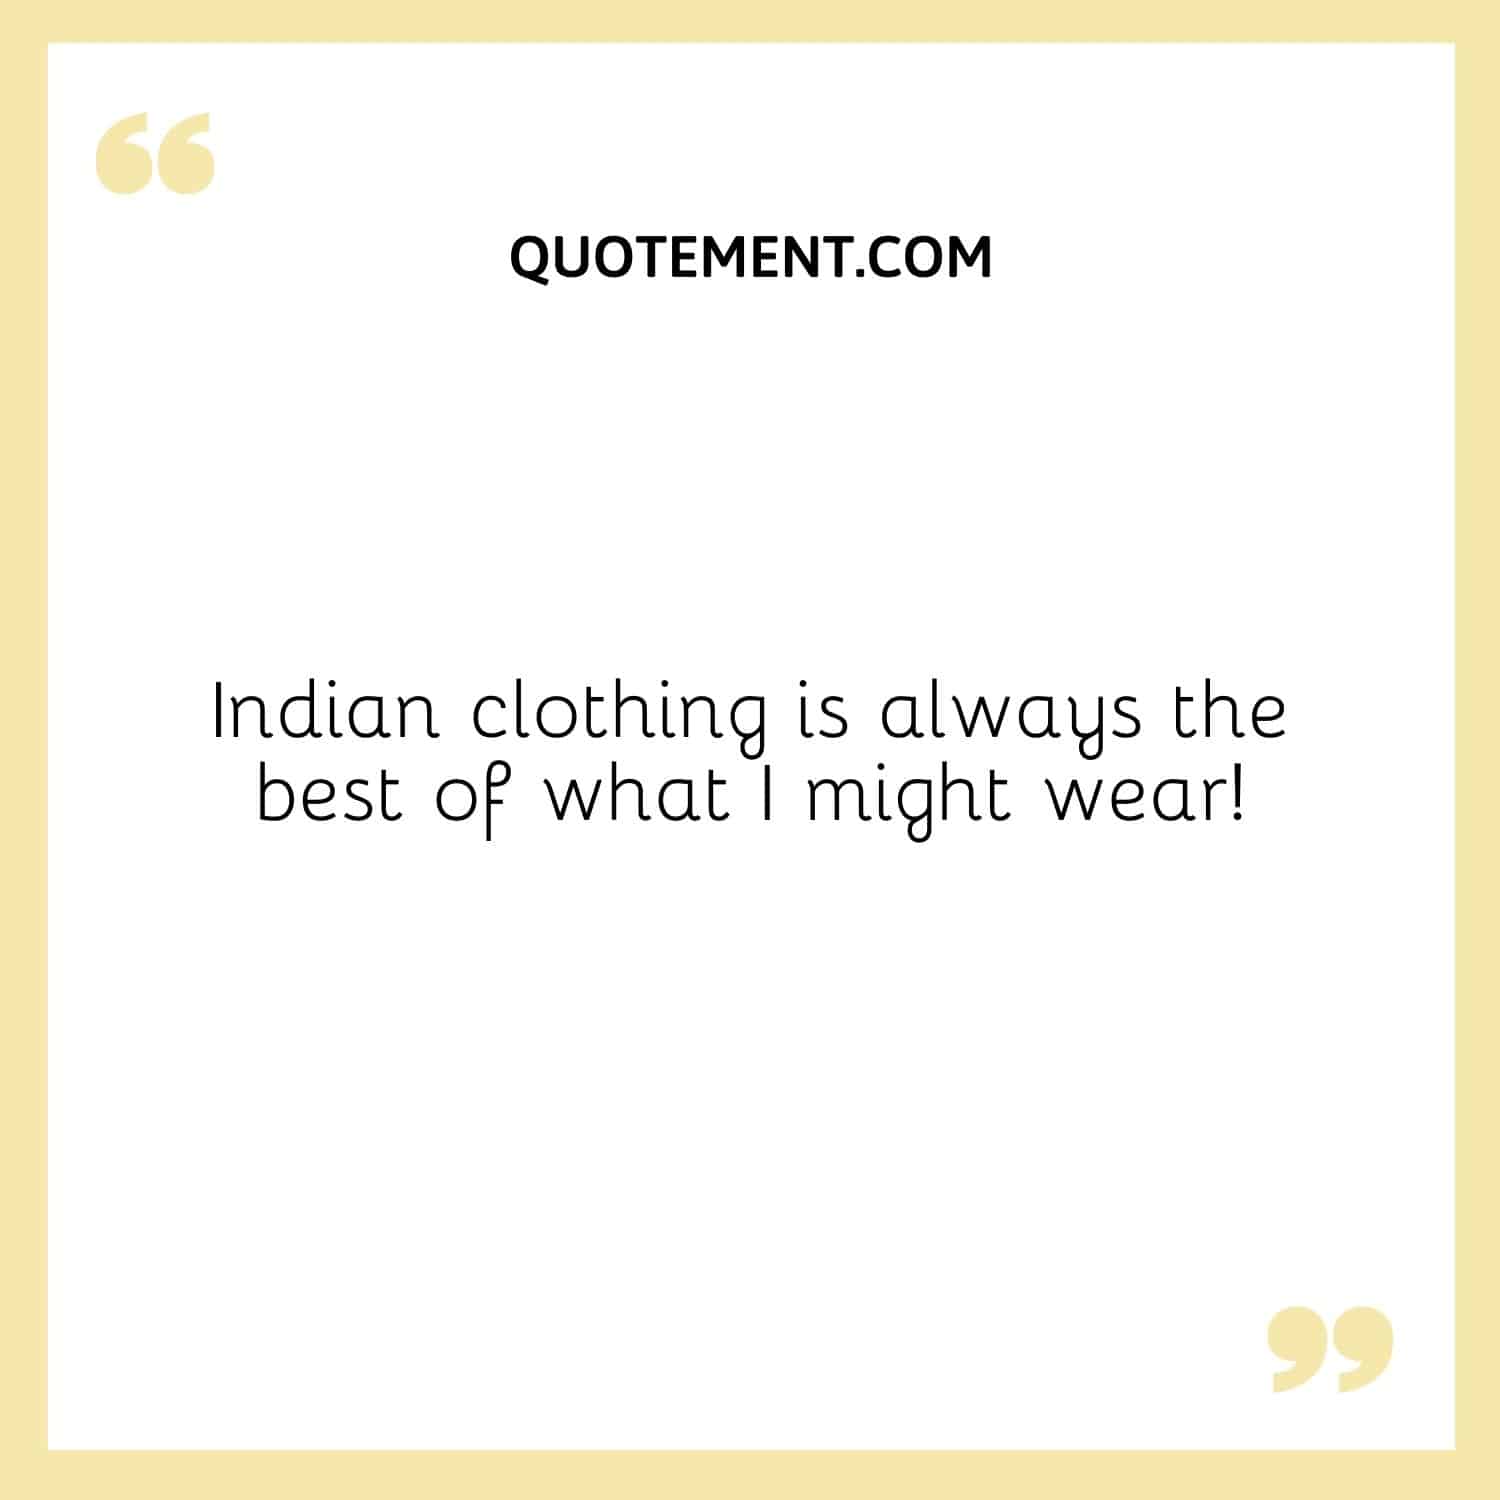 Indian clothing is always the best of what I might wear!